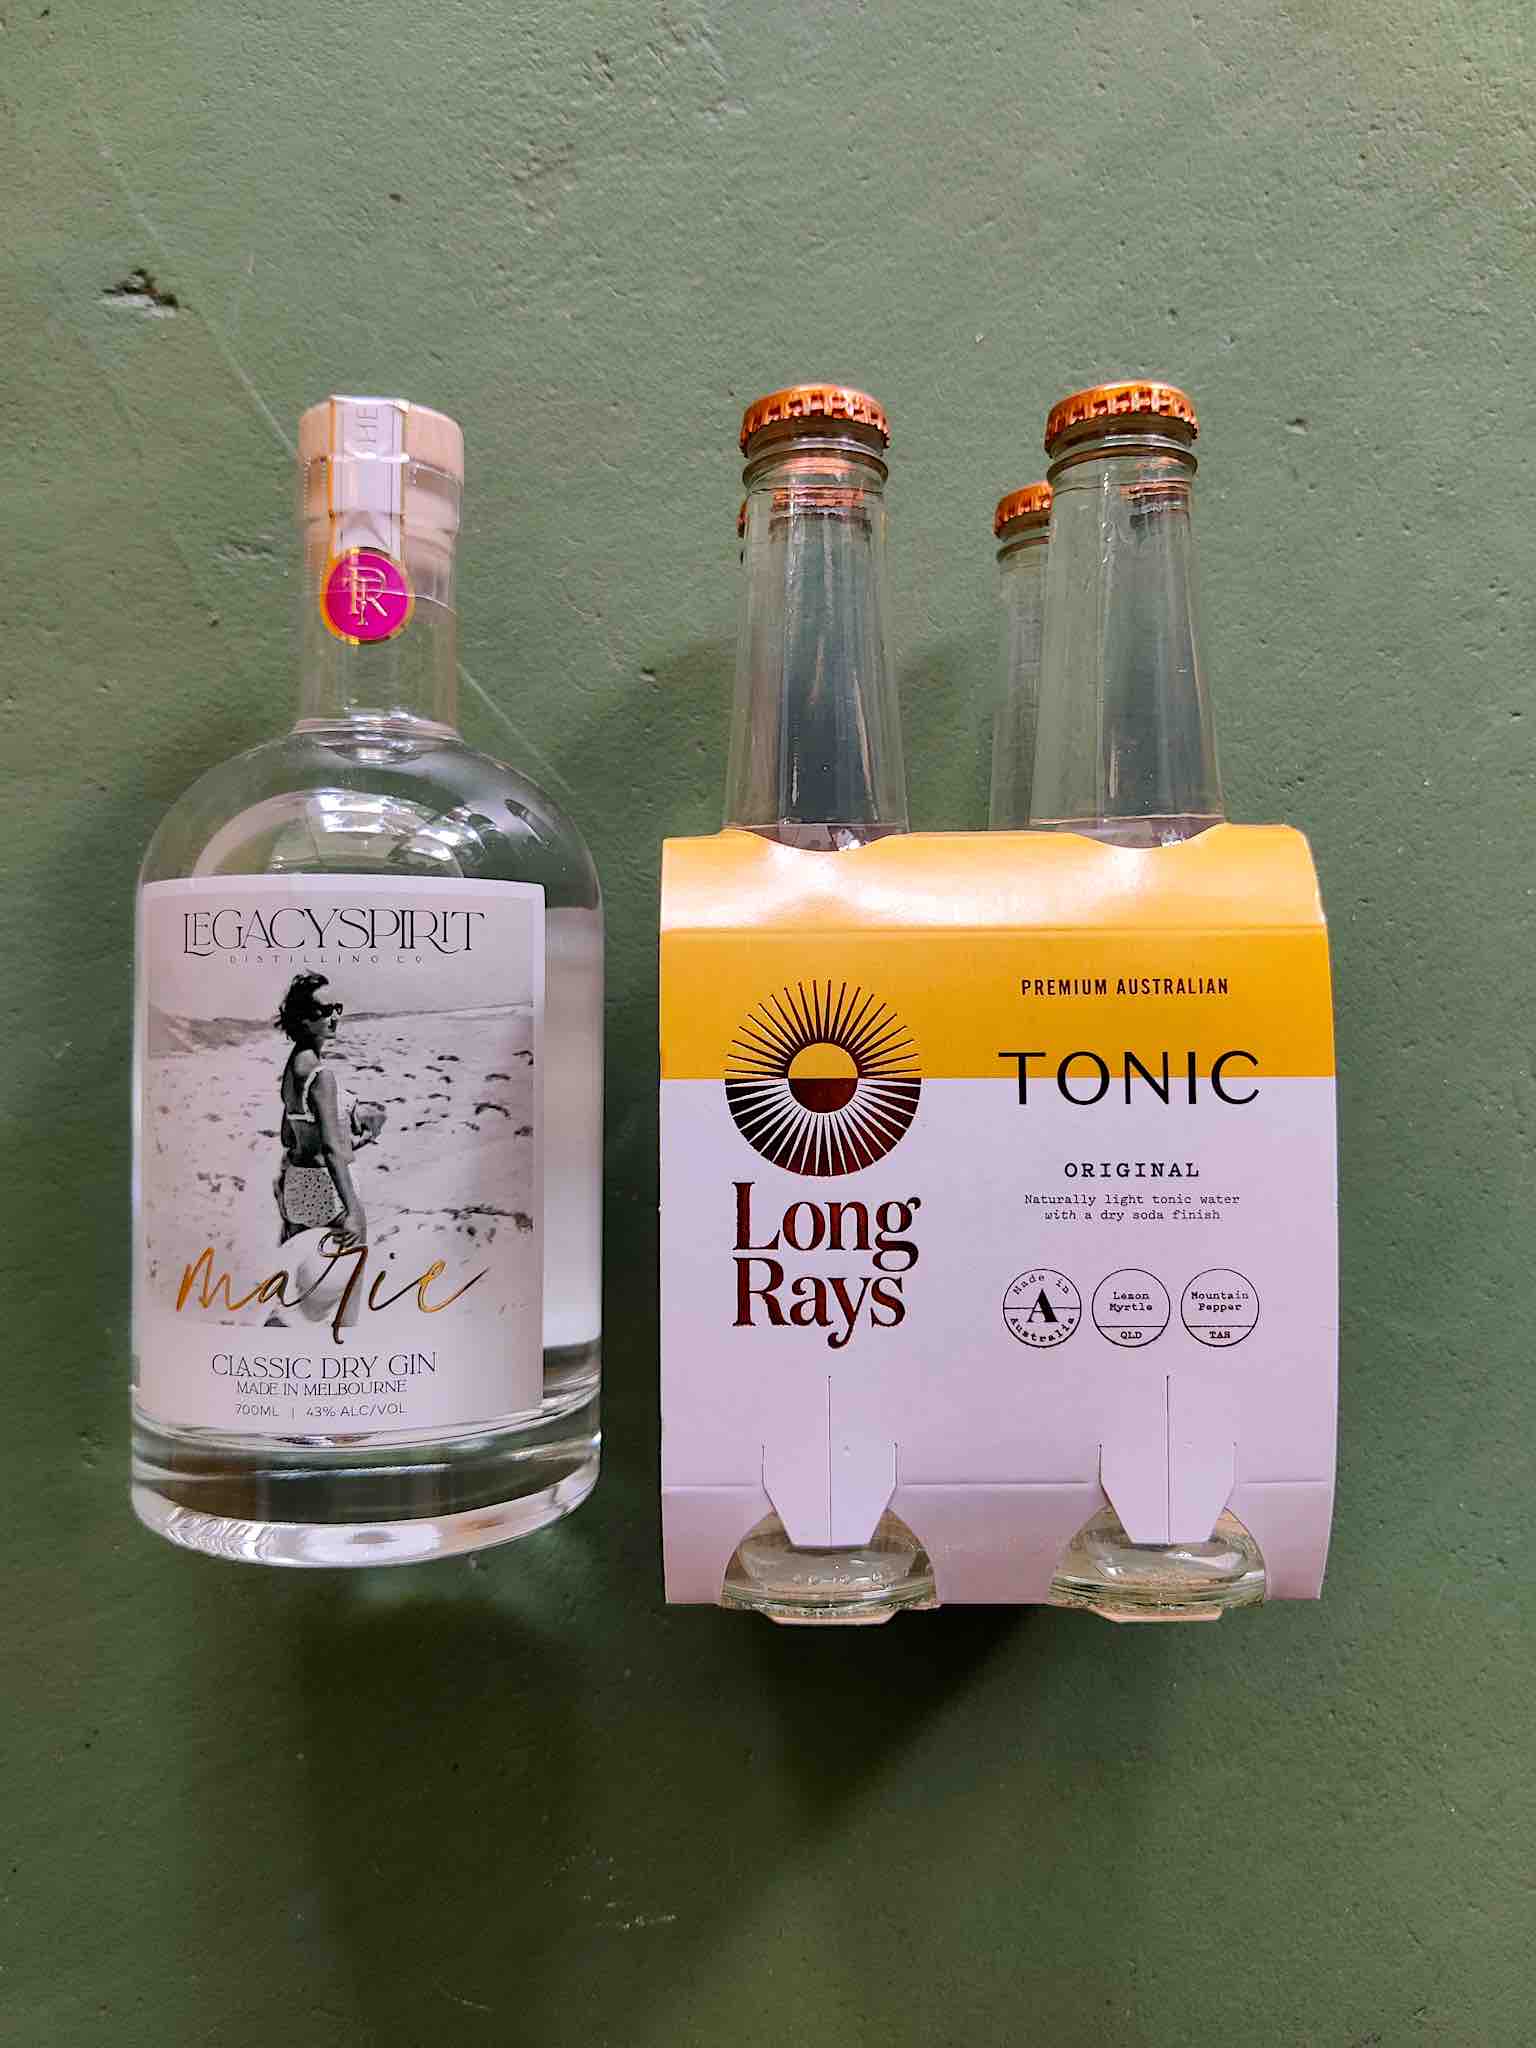 A bottle of Legacy Spirit Marie gin with a 4 pack of Long Rays Original Tonic